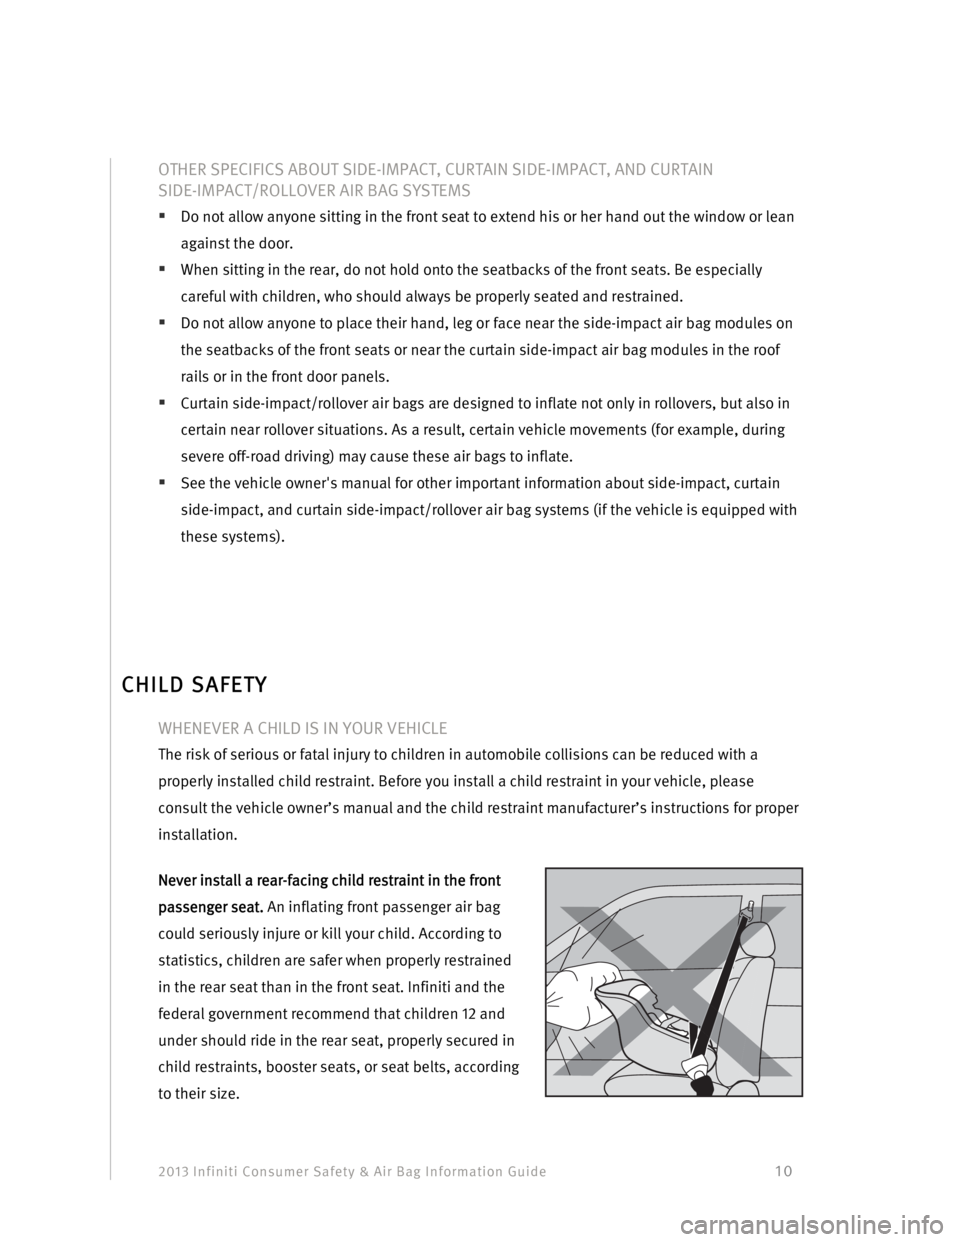 INFINITI EX 2013  Consumer Safety And Air Bag Information Guide 2013 Infiniti Consumer Safety & Air Bag Information Guide                                         10 
OTHER SPECIFICS ABOUT SIDE-IMPACT, CURTAIN SIDE-IMPACT, AND CURTAIN  
SIDE-IMPACT/ROLLOVER AIR BAG